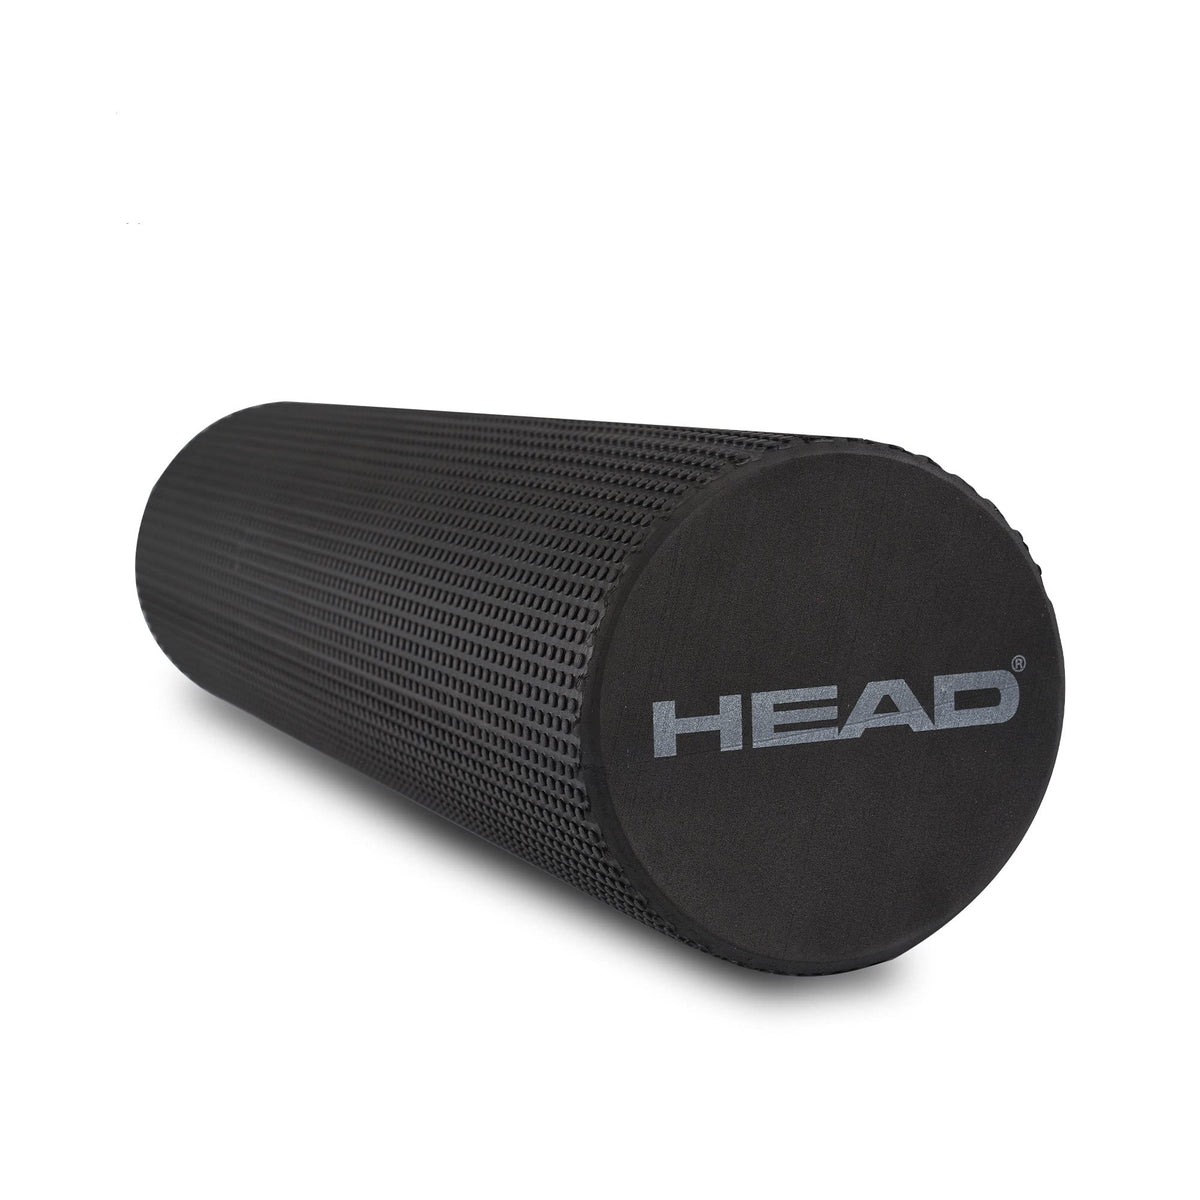 HEAD Exercise Foam Roller - 60 cm | Fitness, Back Pain, Deep Tissue Massage | Home or Gym | Massage and Pain Relief (Black)